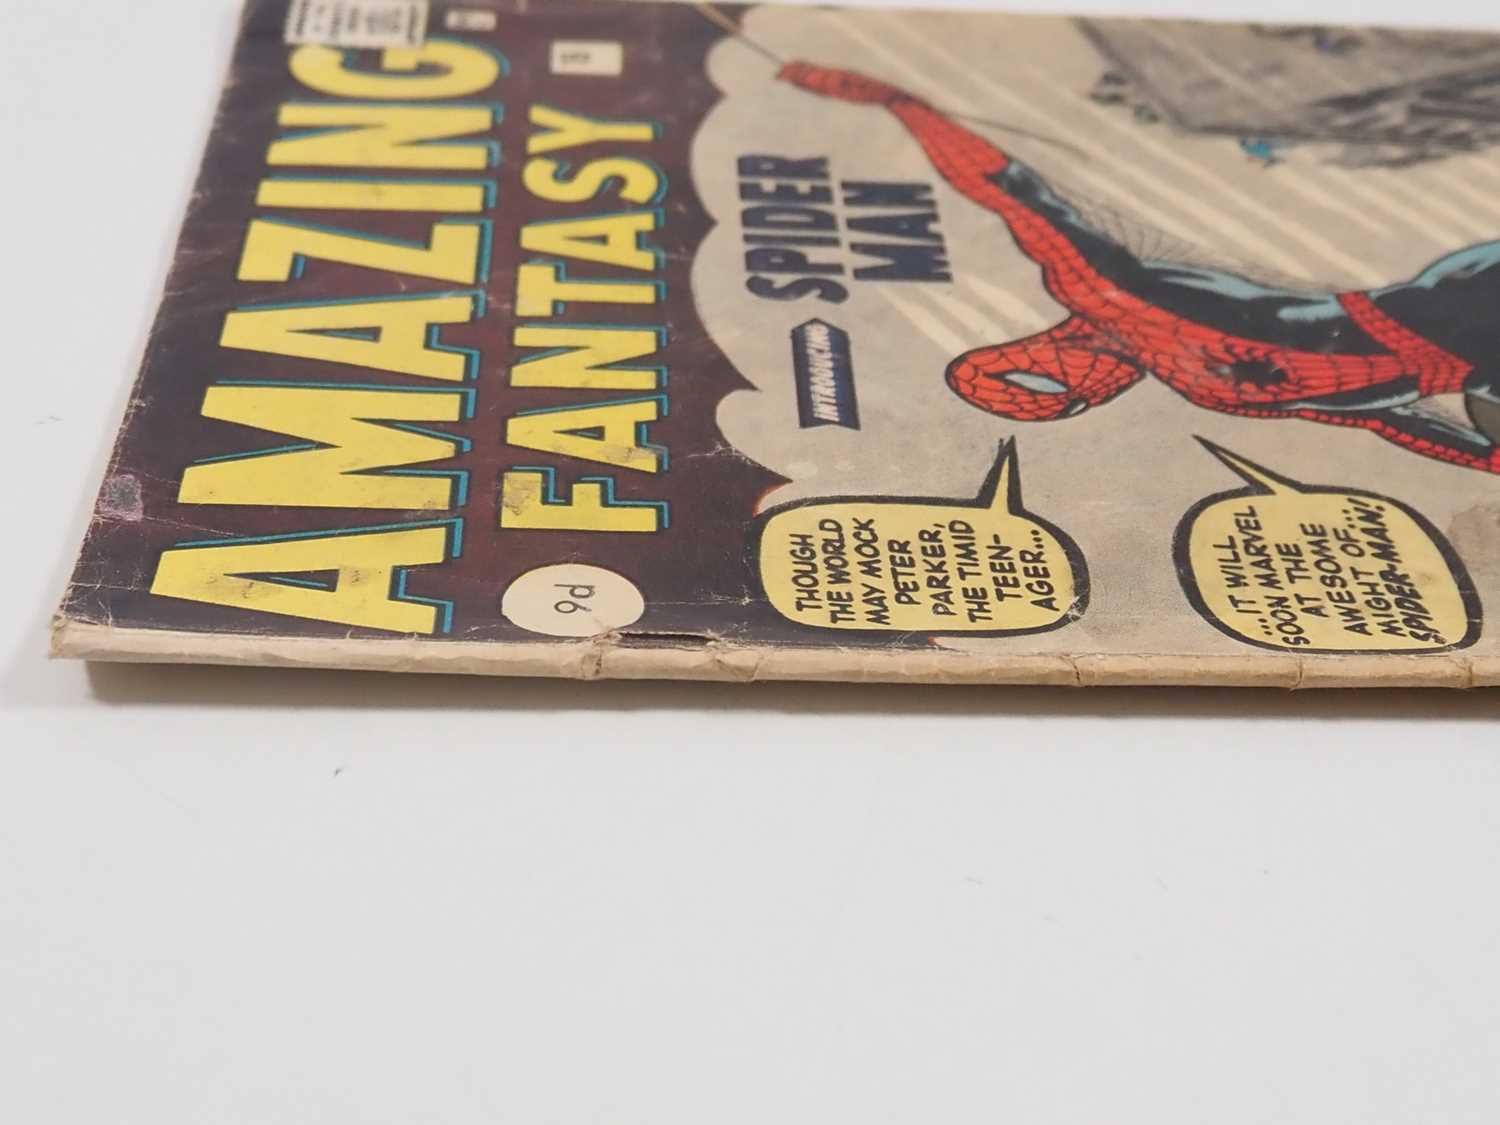 AMAZING FANTASY #15 (1962 - MARVEL - UK Price Variant) - The most valuable Silver Age comic book, by - Image 24 of 26